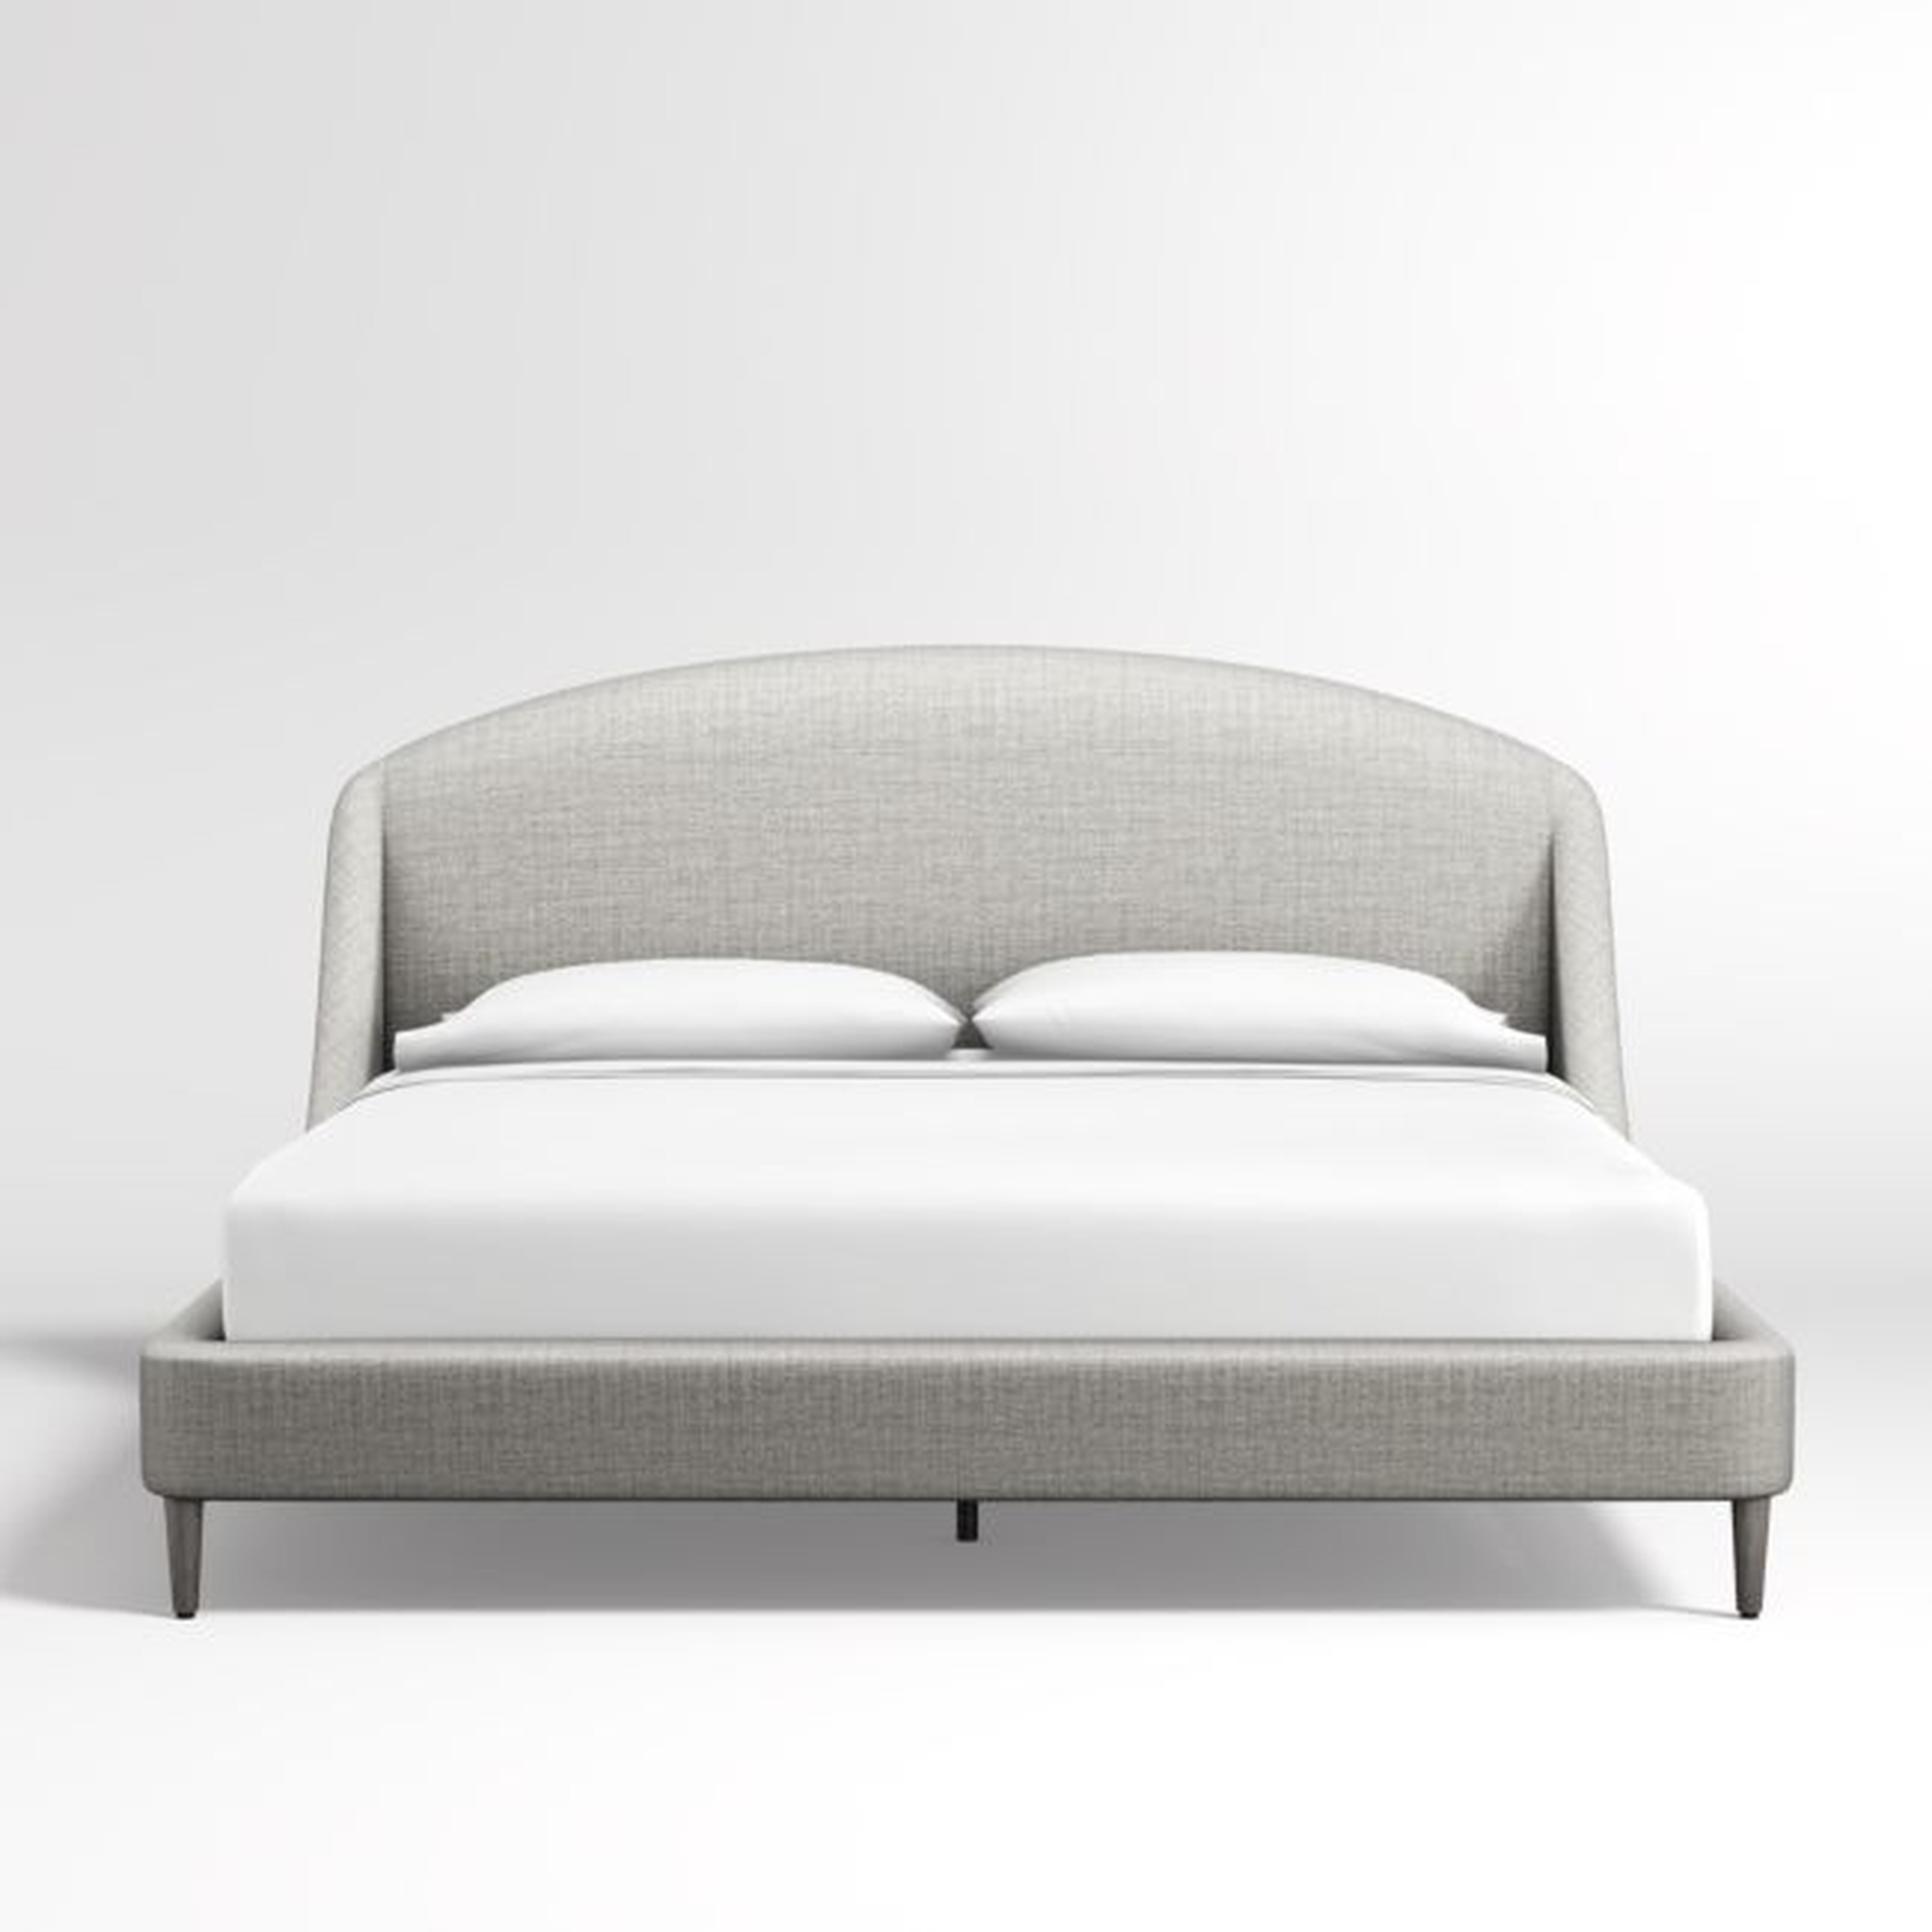 Lafayette Mist Grey Upholstered King Bed without Footboard - Crate and Barrel